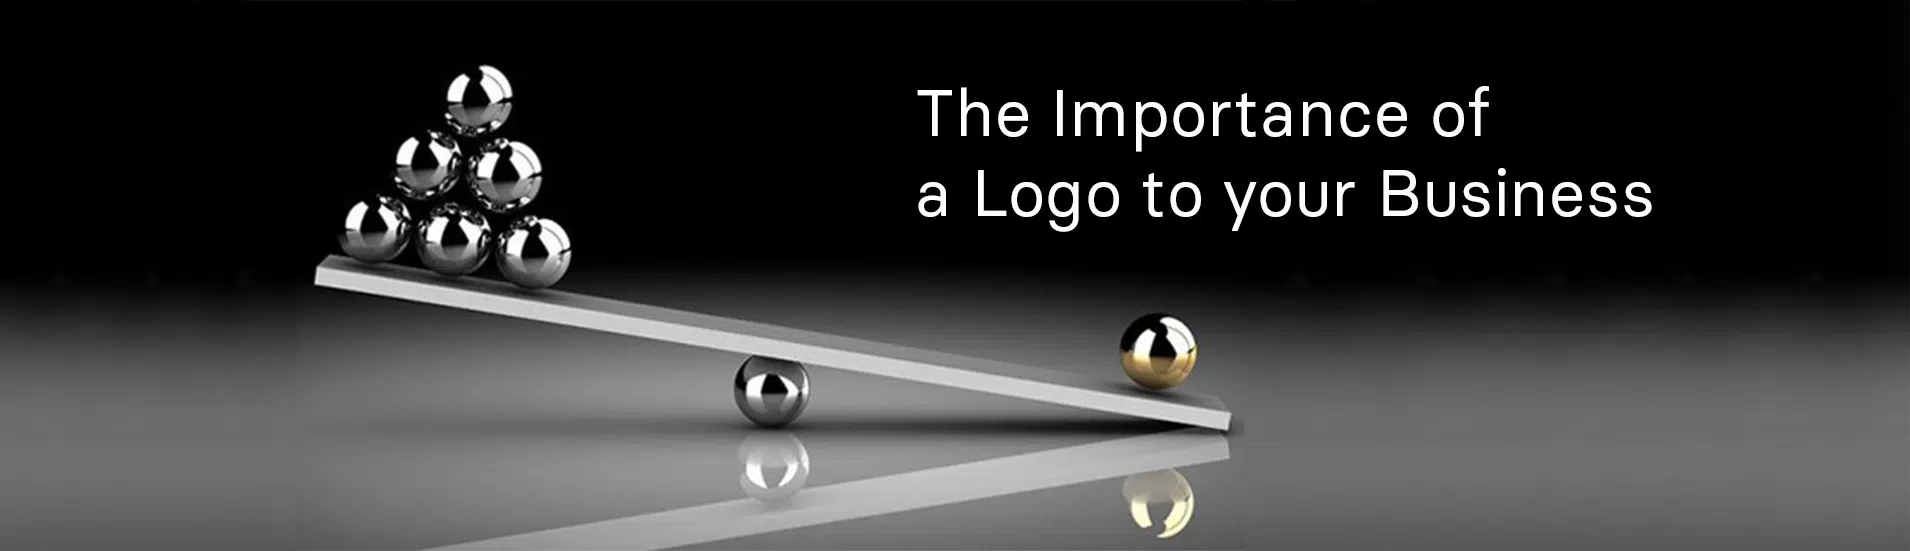 The Importance of a Logo to your Business.